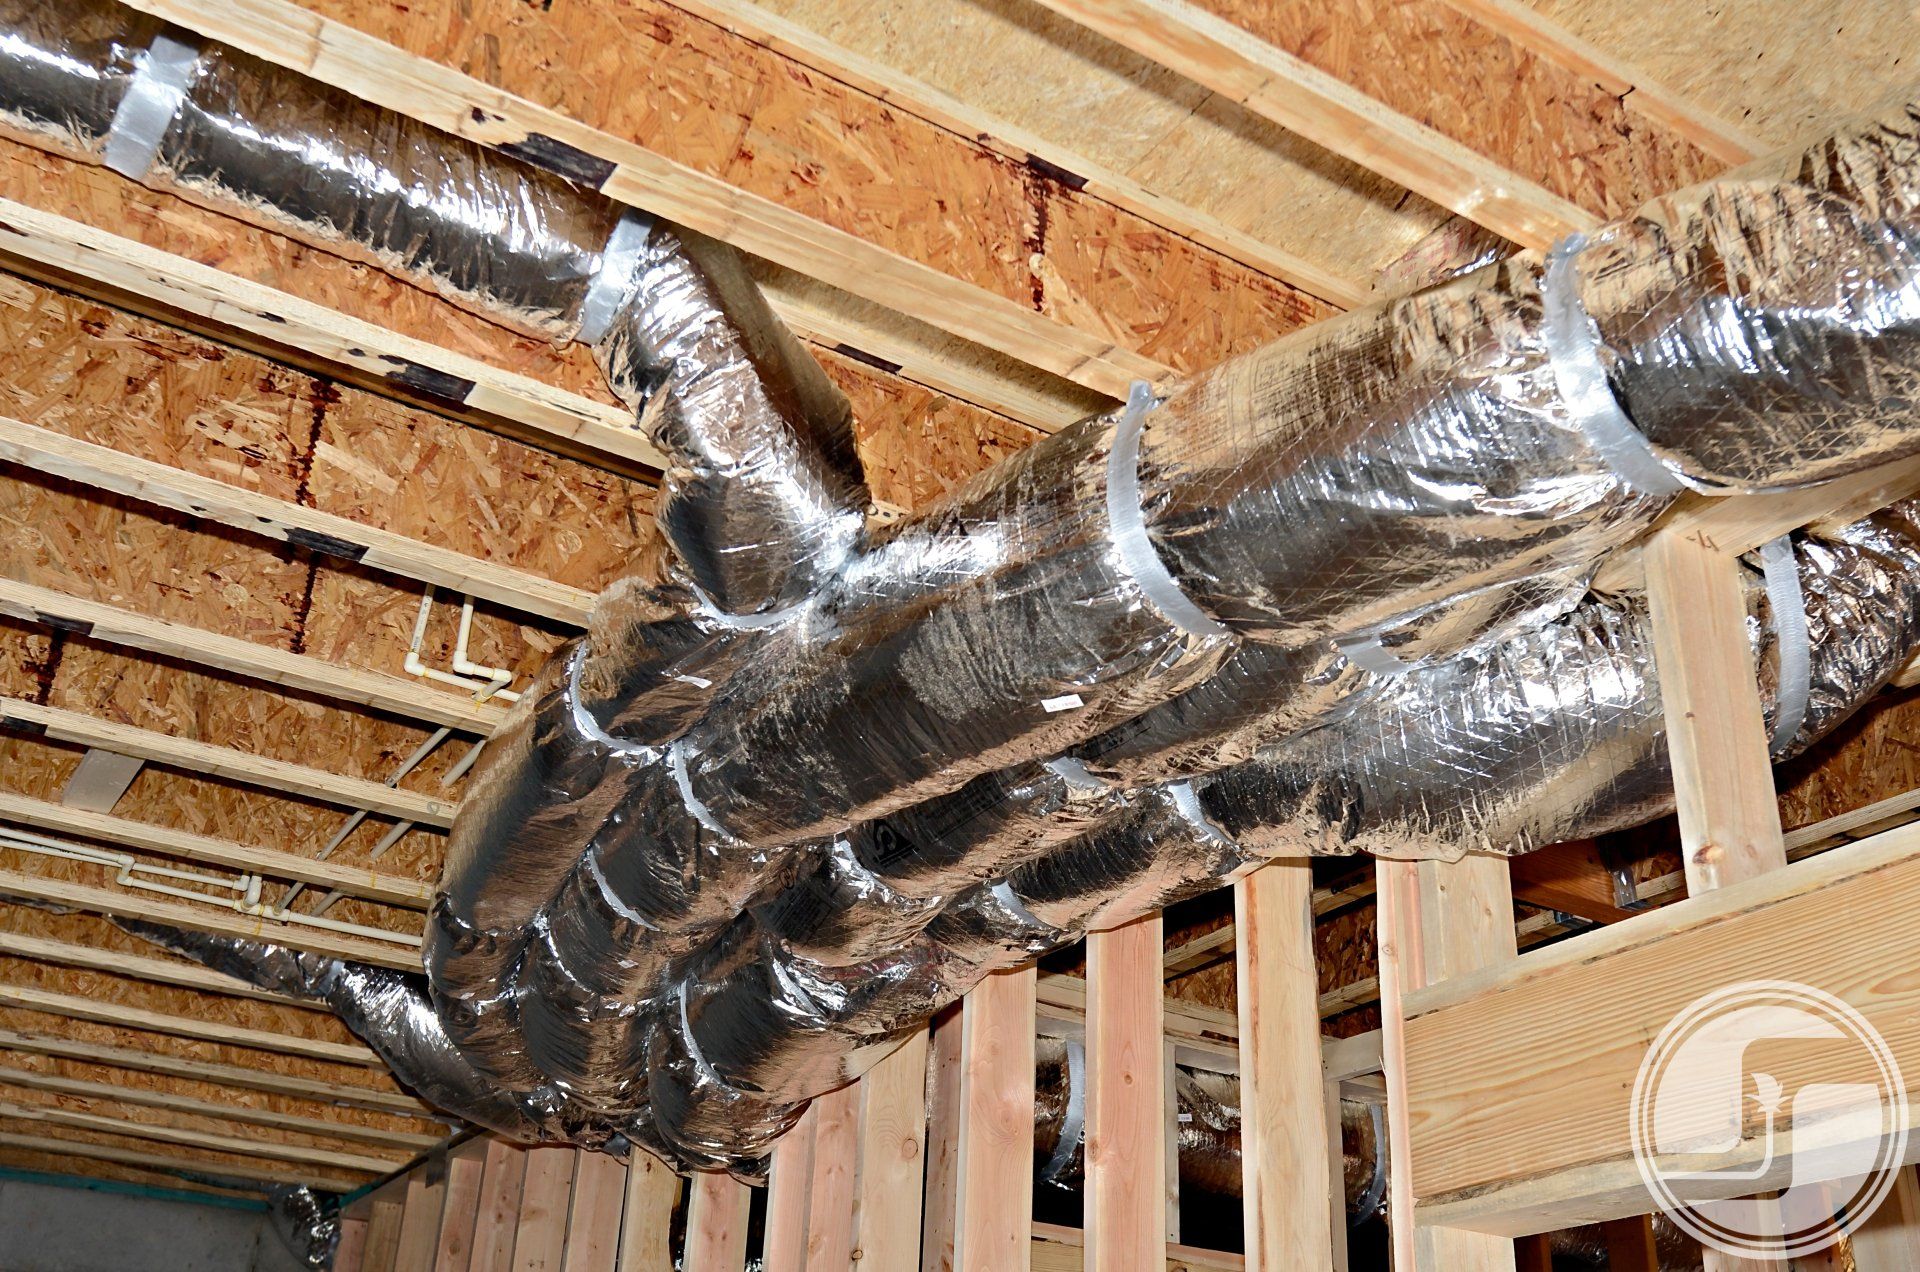 insulated air ducts in unfinished ceiling